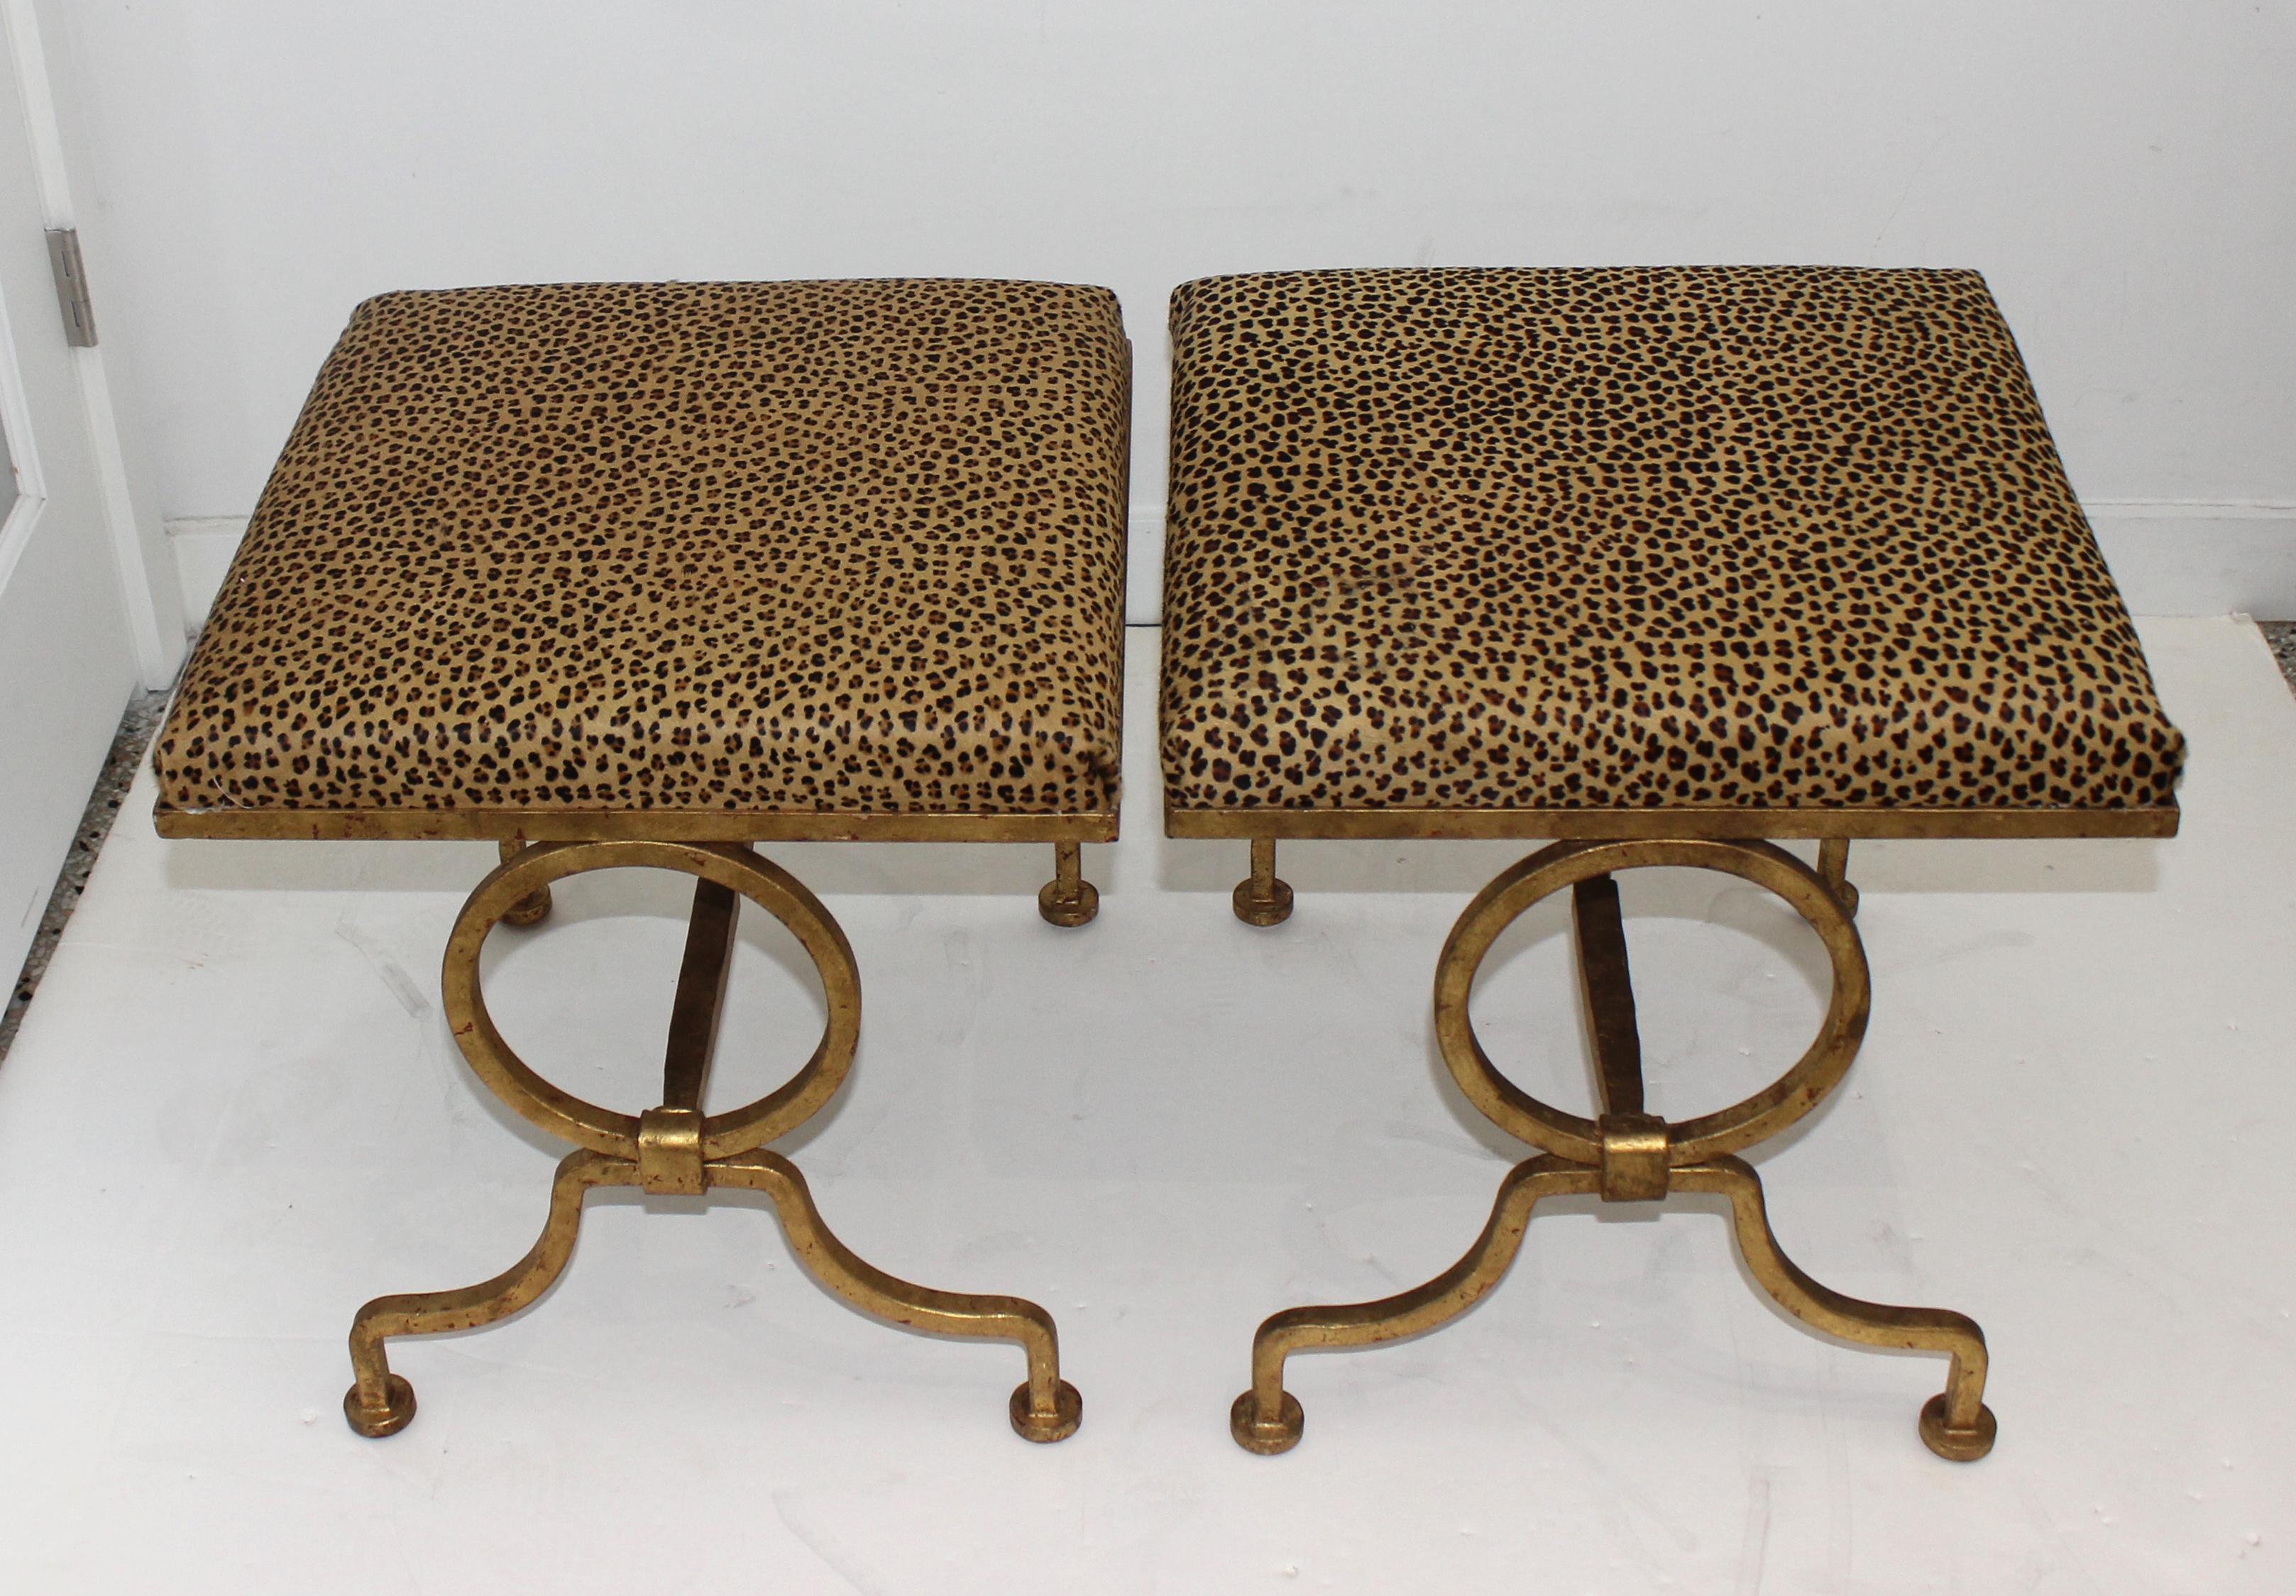 20th Century Pair of Andre Arbus Style Gold Gilt Iron Benches